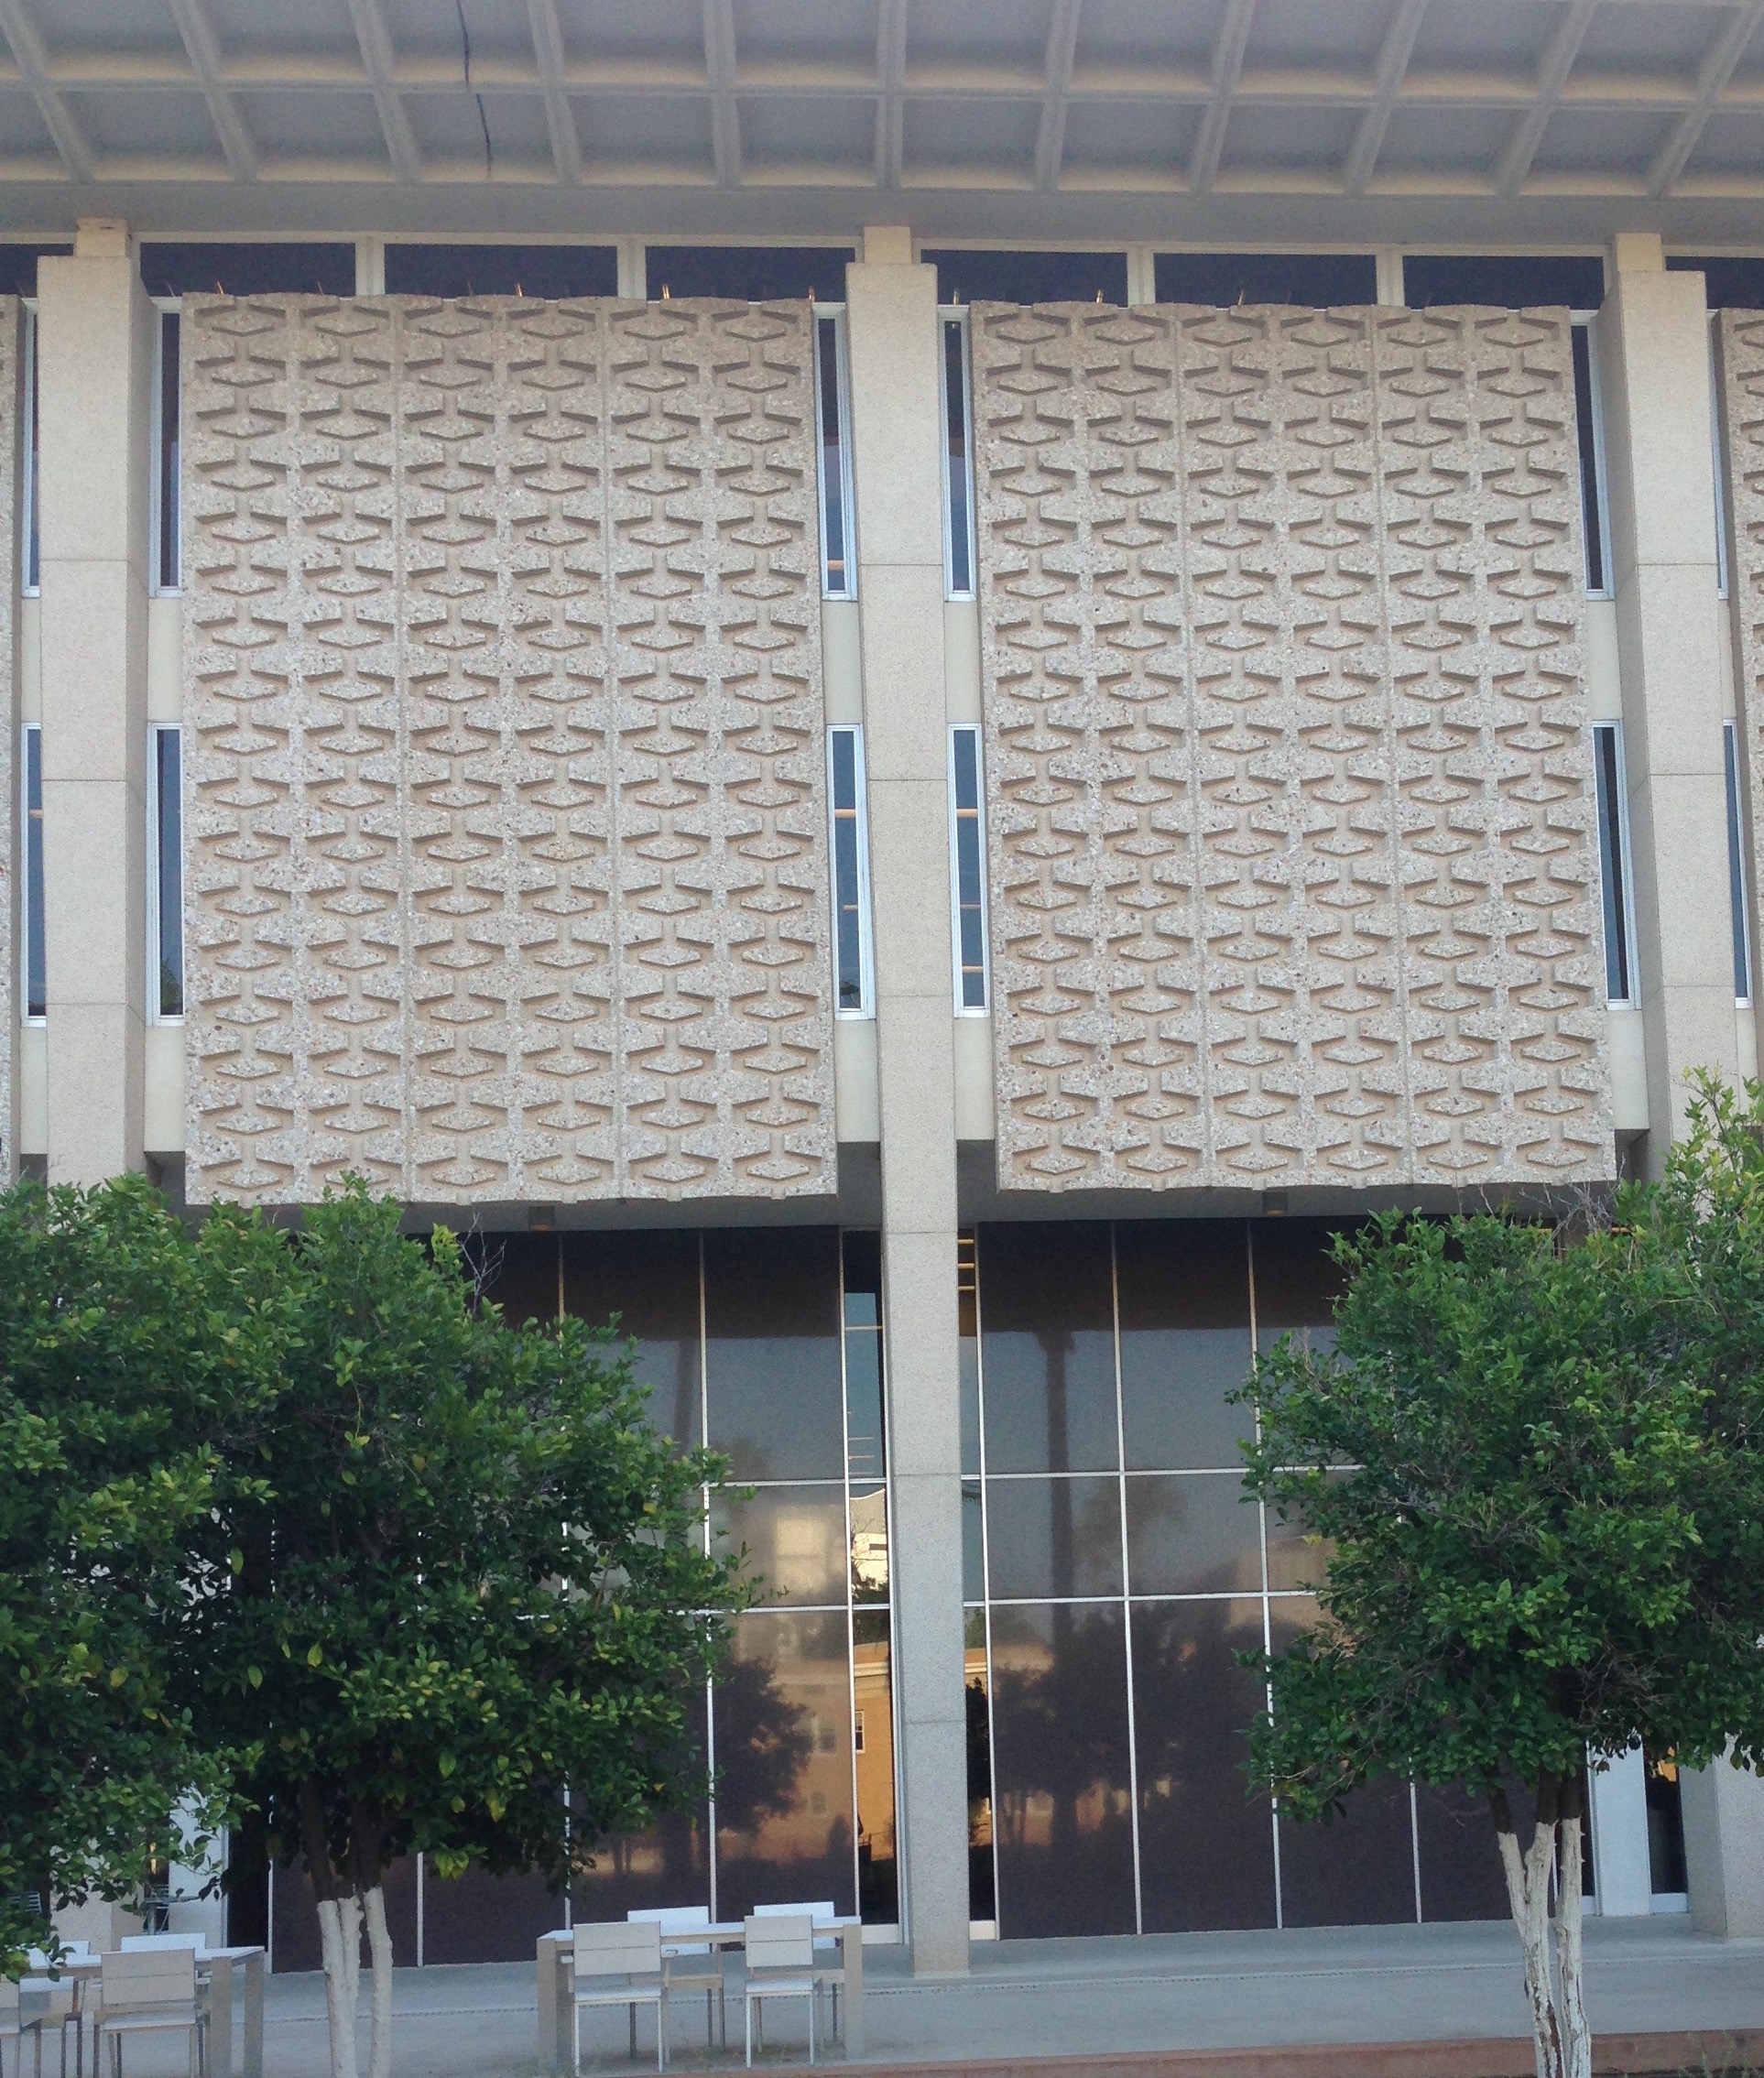  The old ASU library with its midcentury modern exterior concrete patterning. 